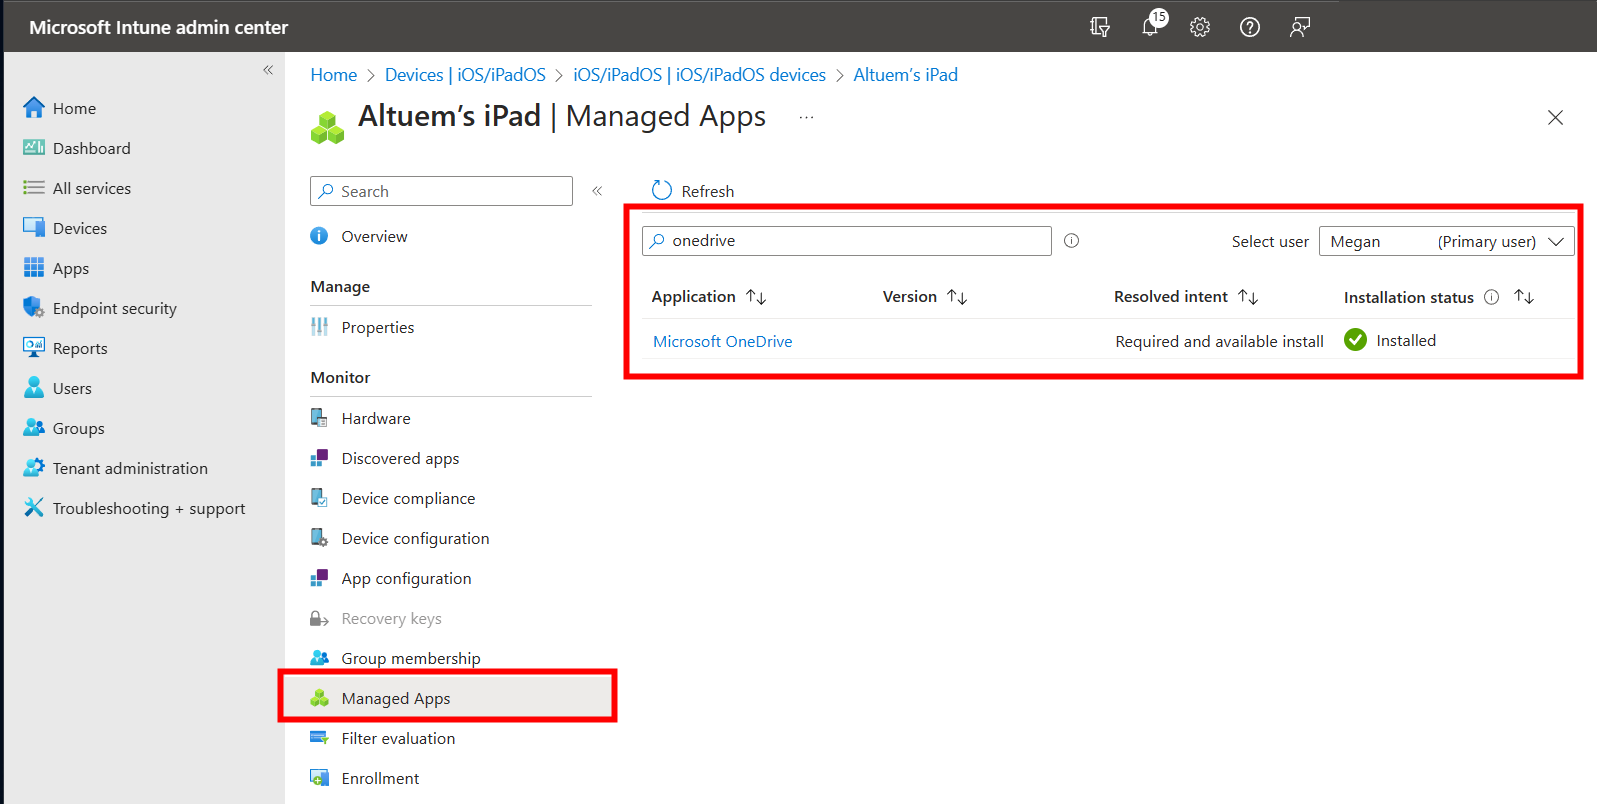 A screenshot of the Managed Apps page in the Intune admin center.